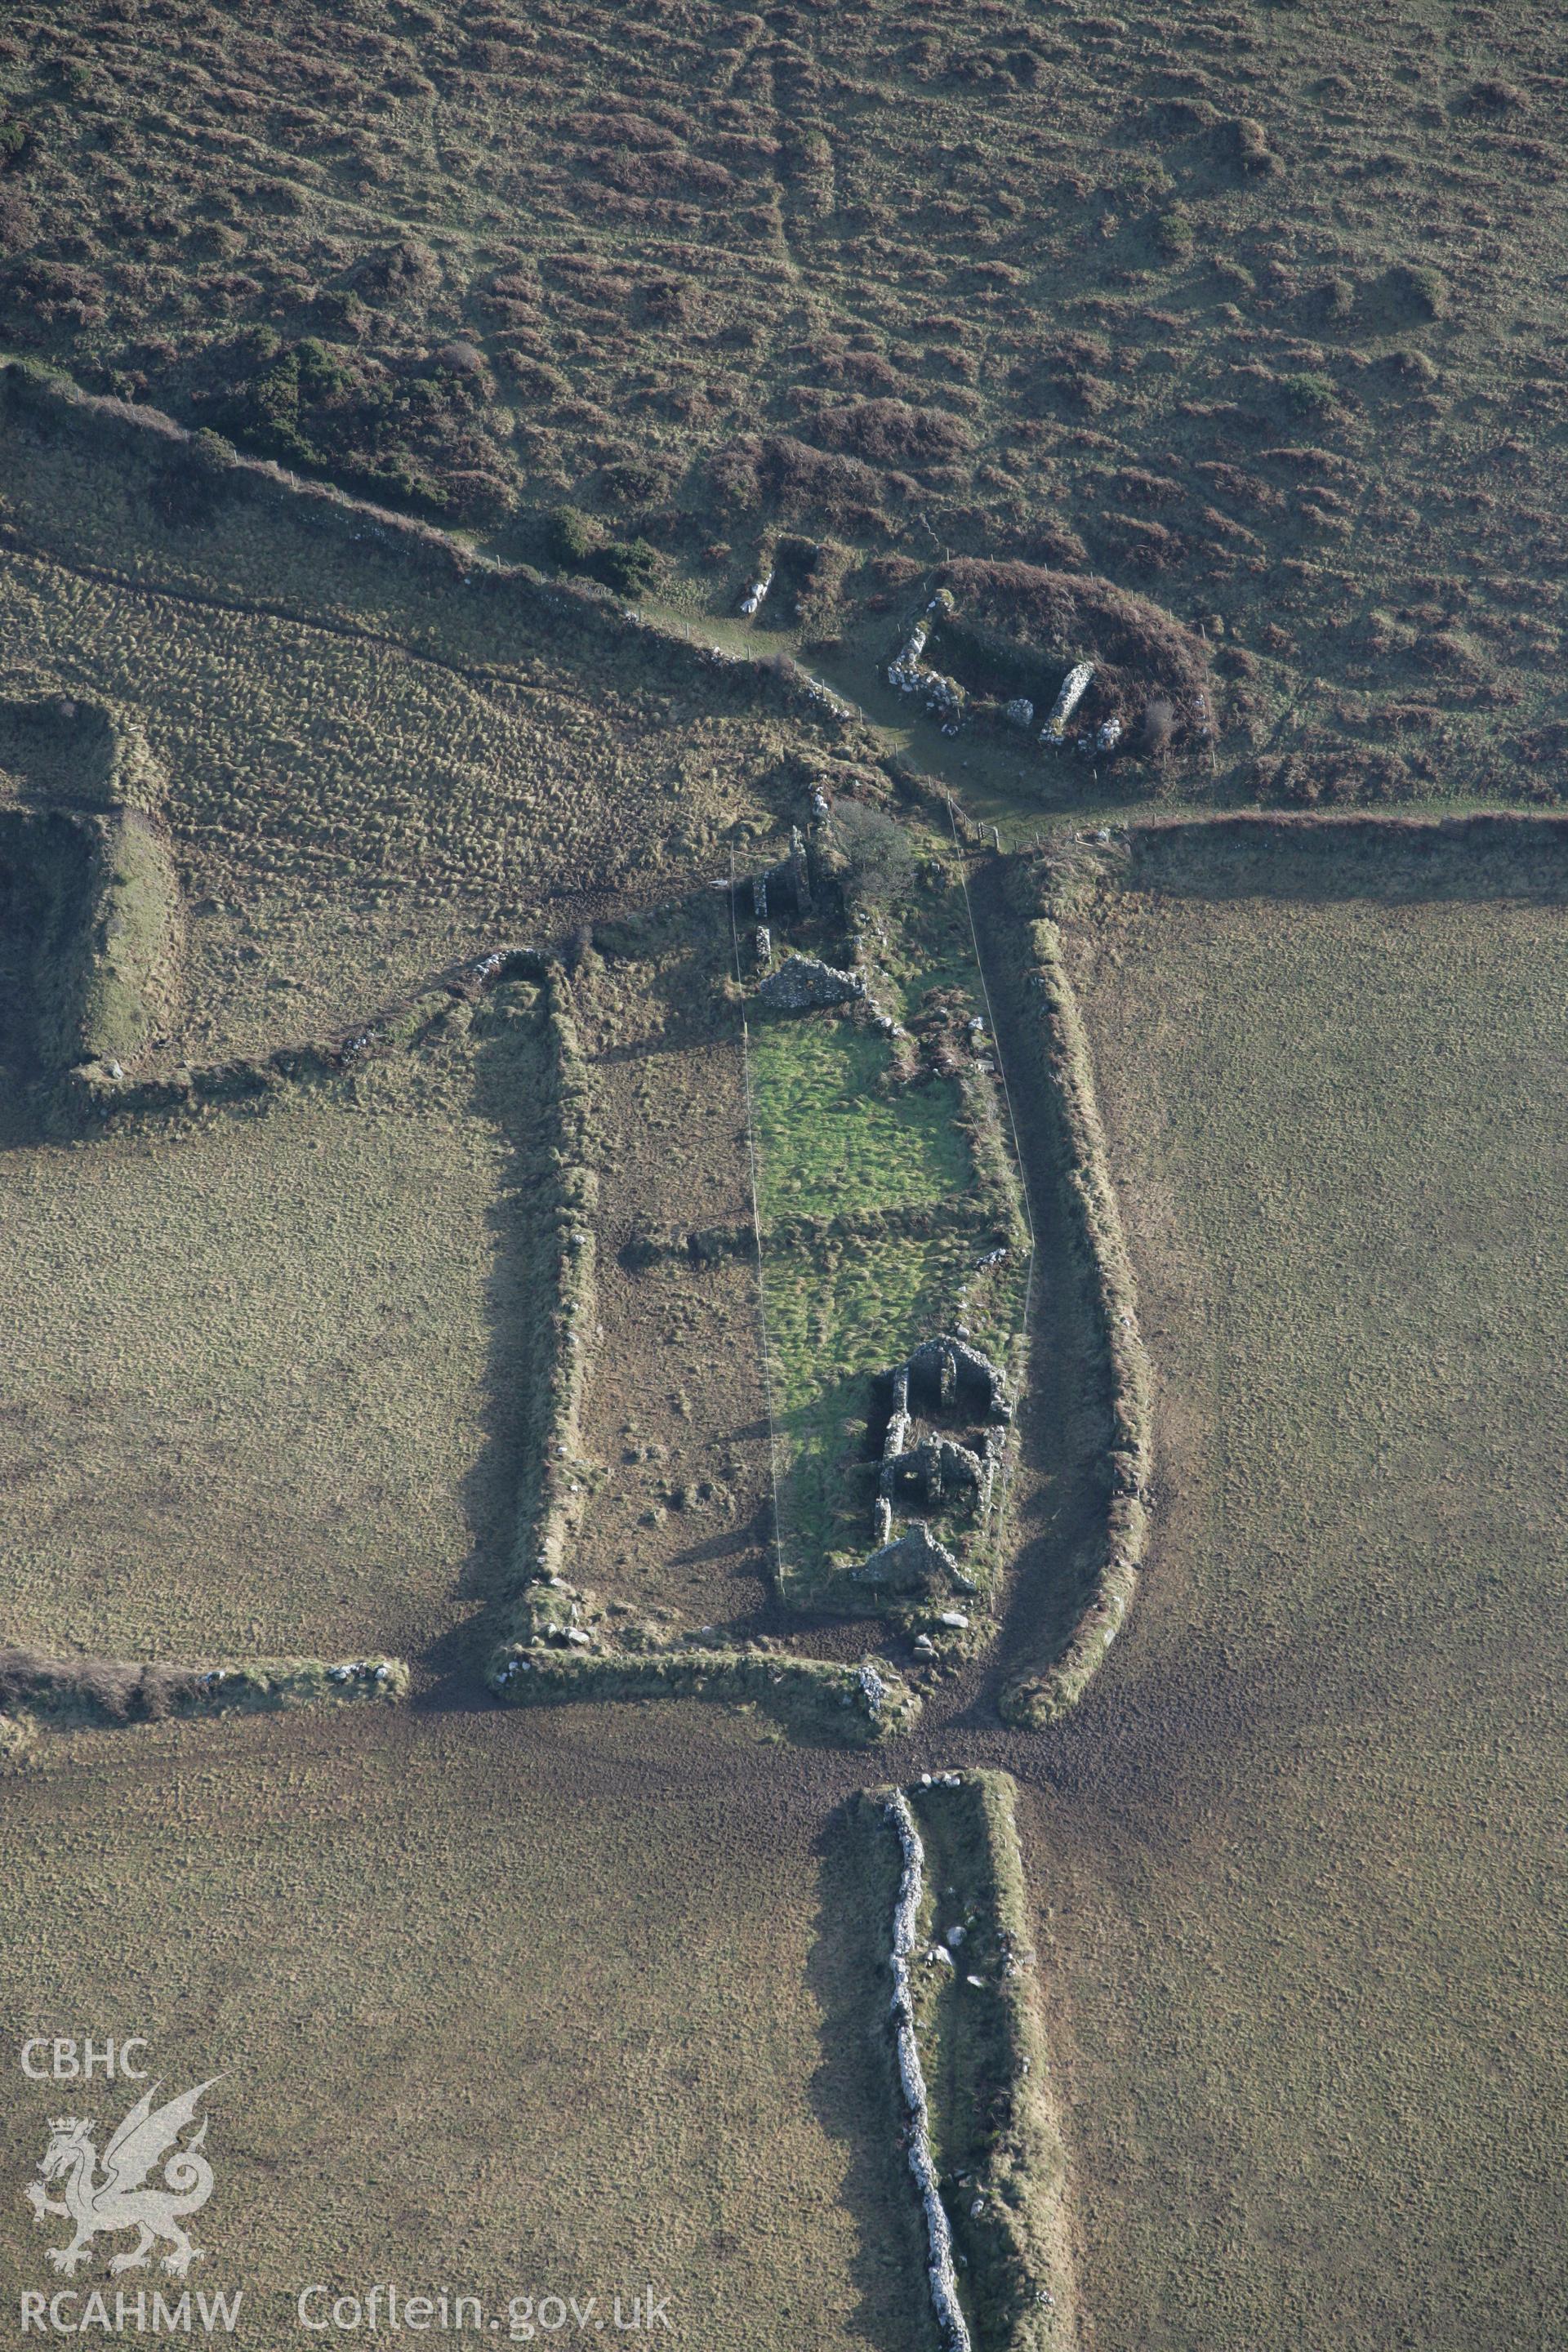 RCAHMW colour oblique aerial photograph of the Quaker village at Maes-y-Mynydd. Taken on 28 January 2009 by Toby Driver